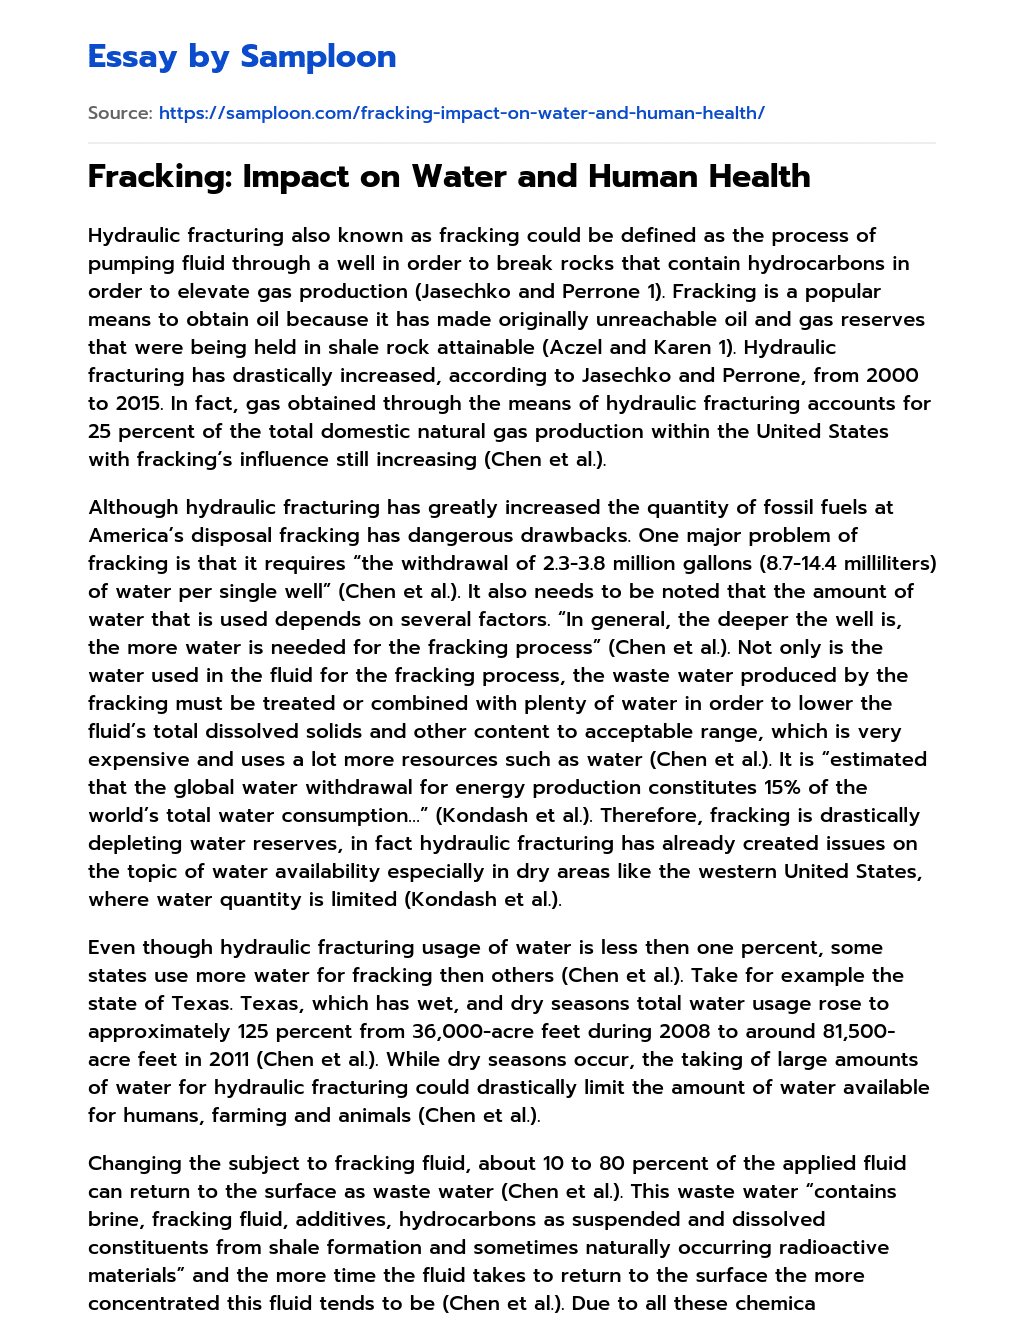 Fracking: Impact on Water and Human Health  essay